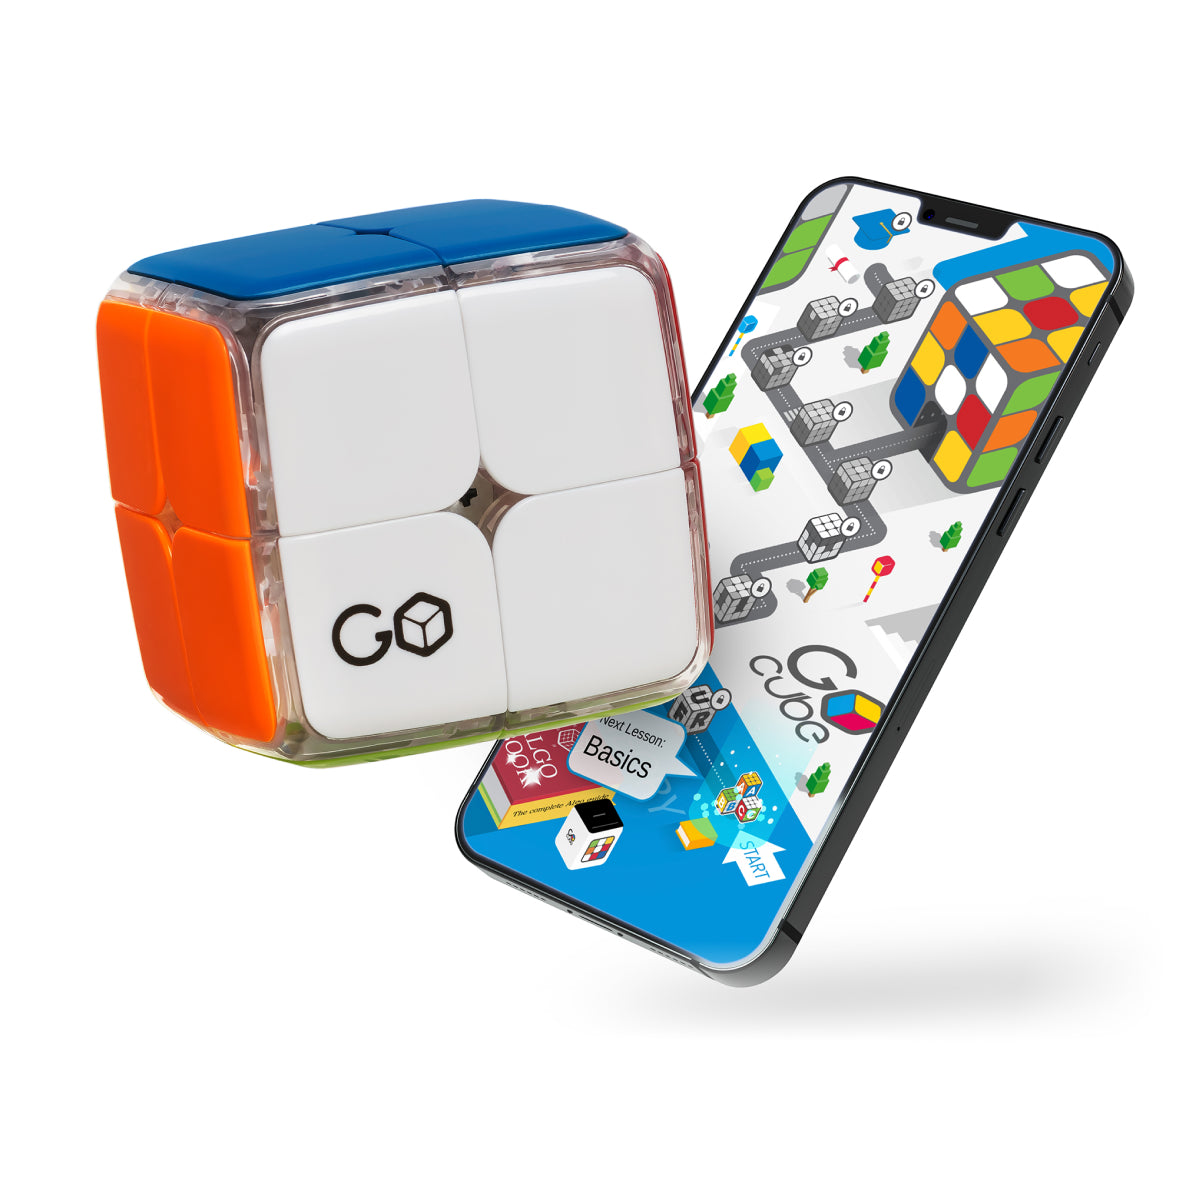 Rubik's Cube Game connected to its app